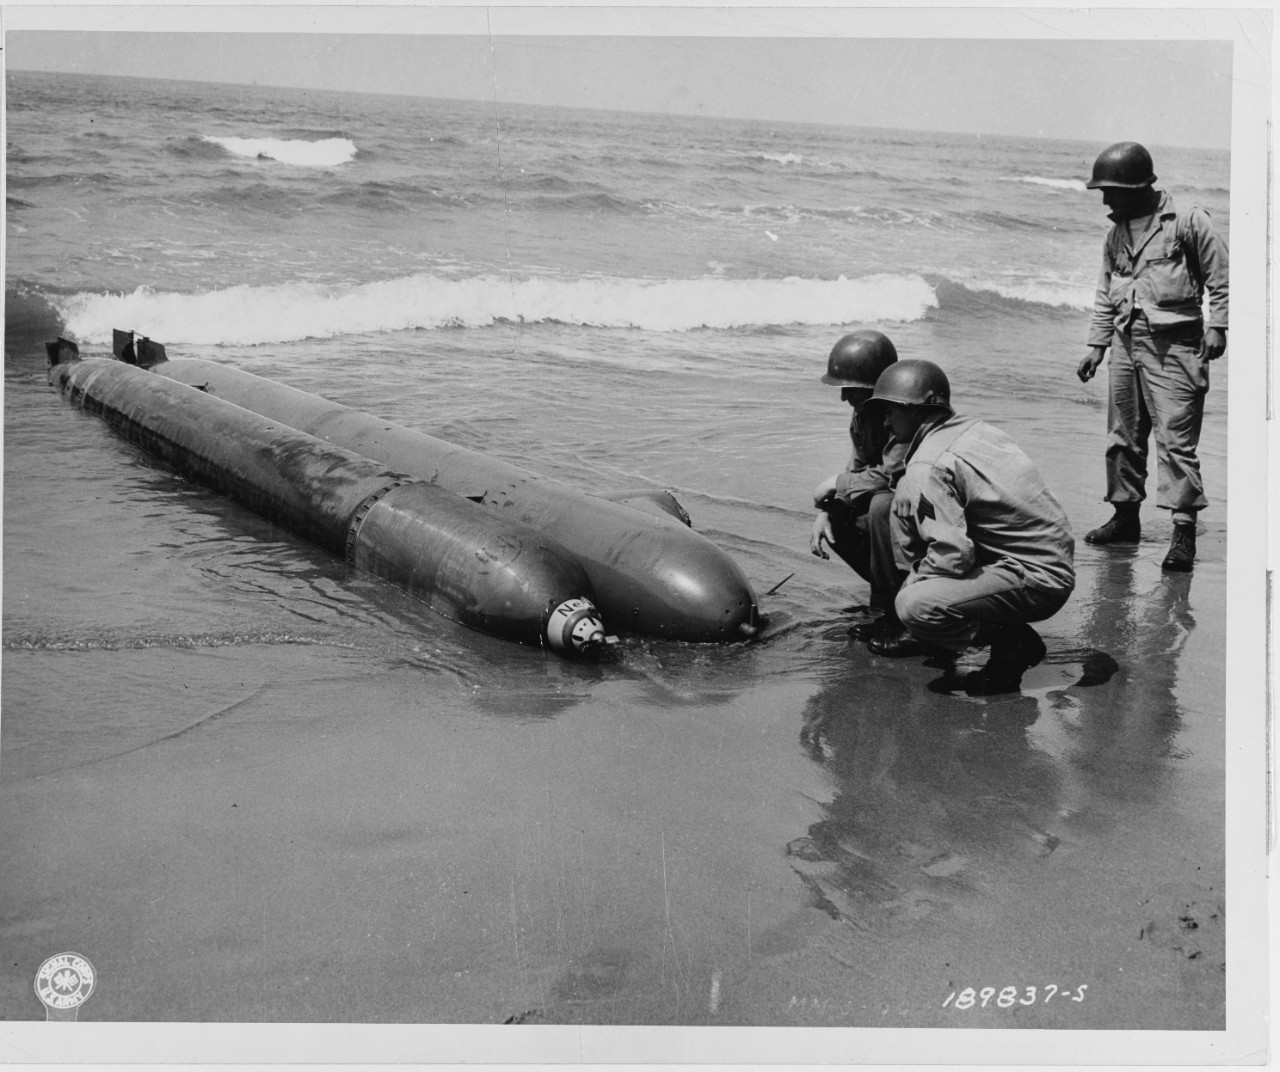 Torpedo attached to its driving compartment of this one-man submarine, beached